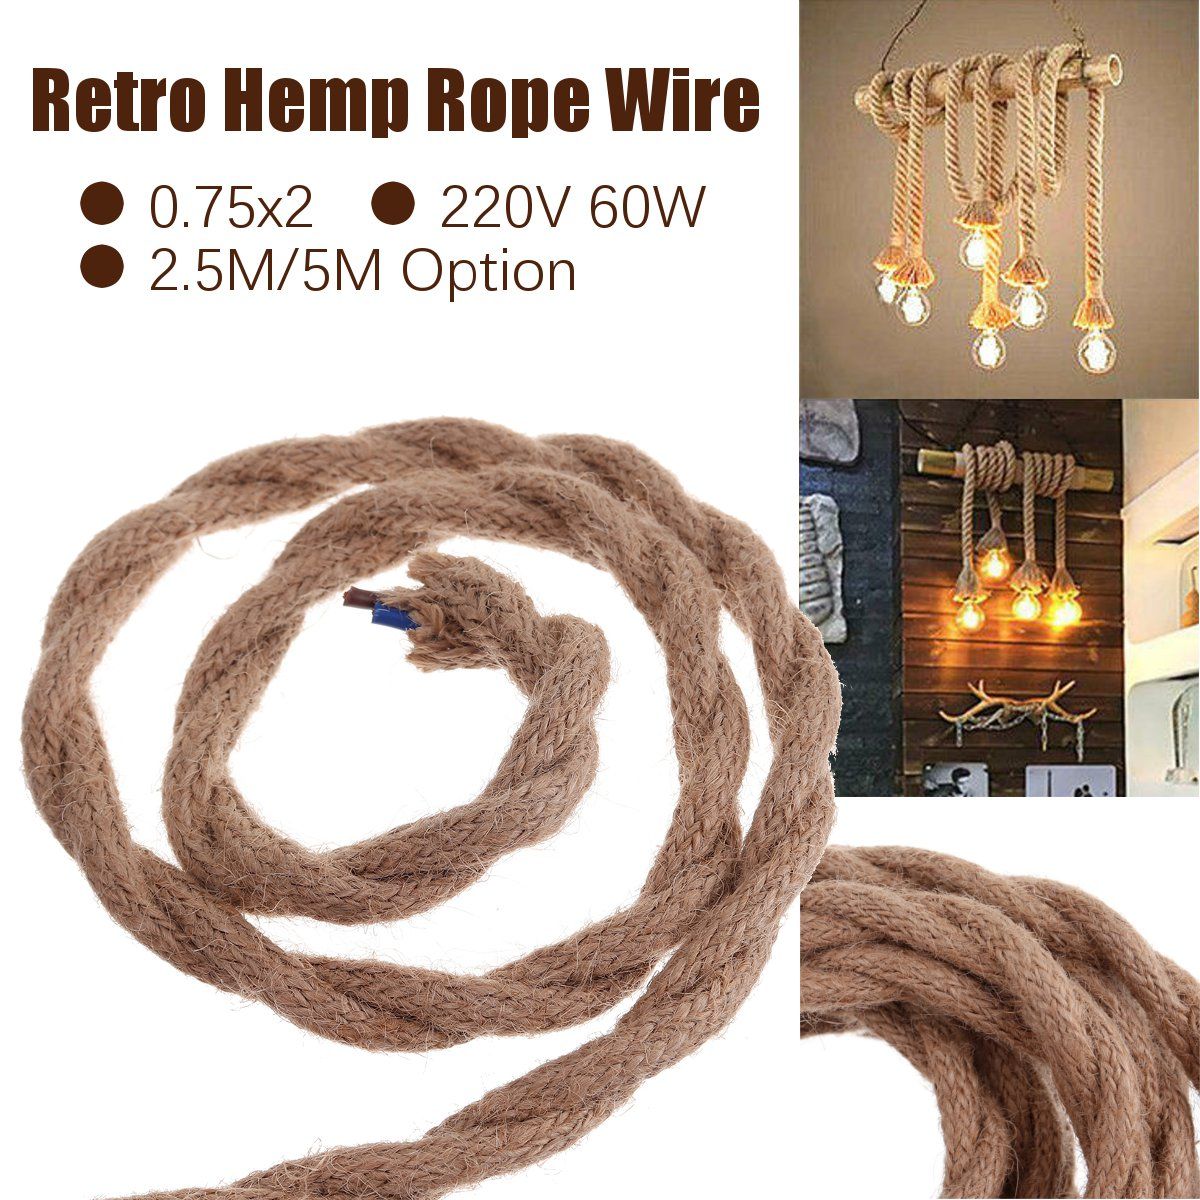 255M-075x2-Hemp-Rope-Wire-Retro-DIY-Braided-Fabric-Twin-Twisted-Cable-Wires-1709416